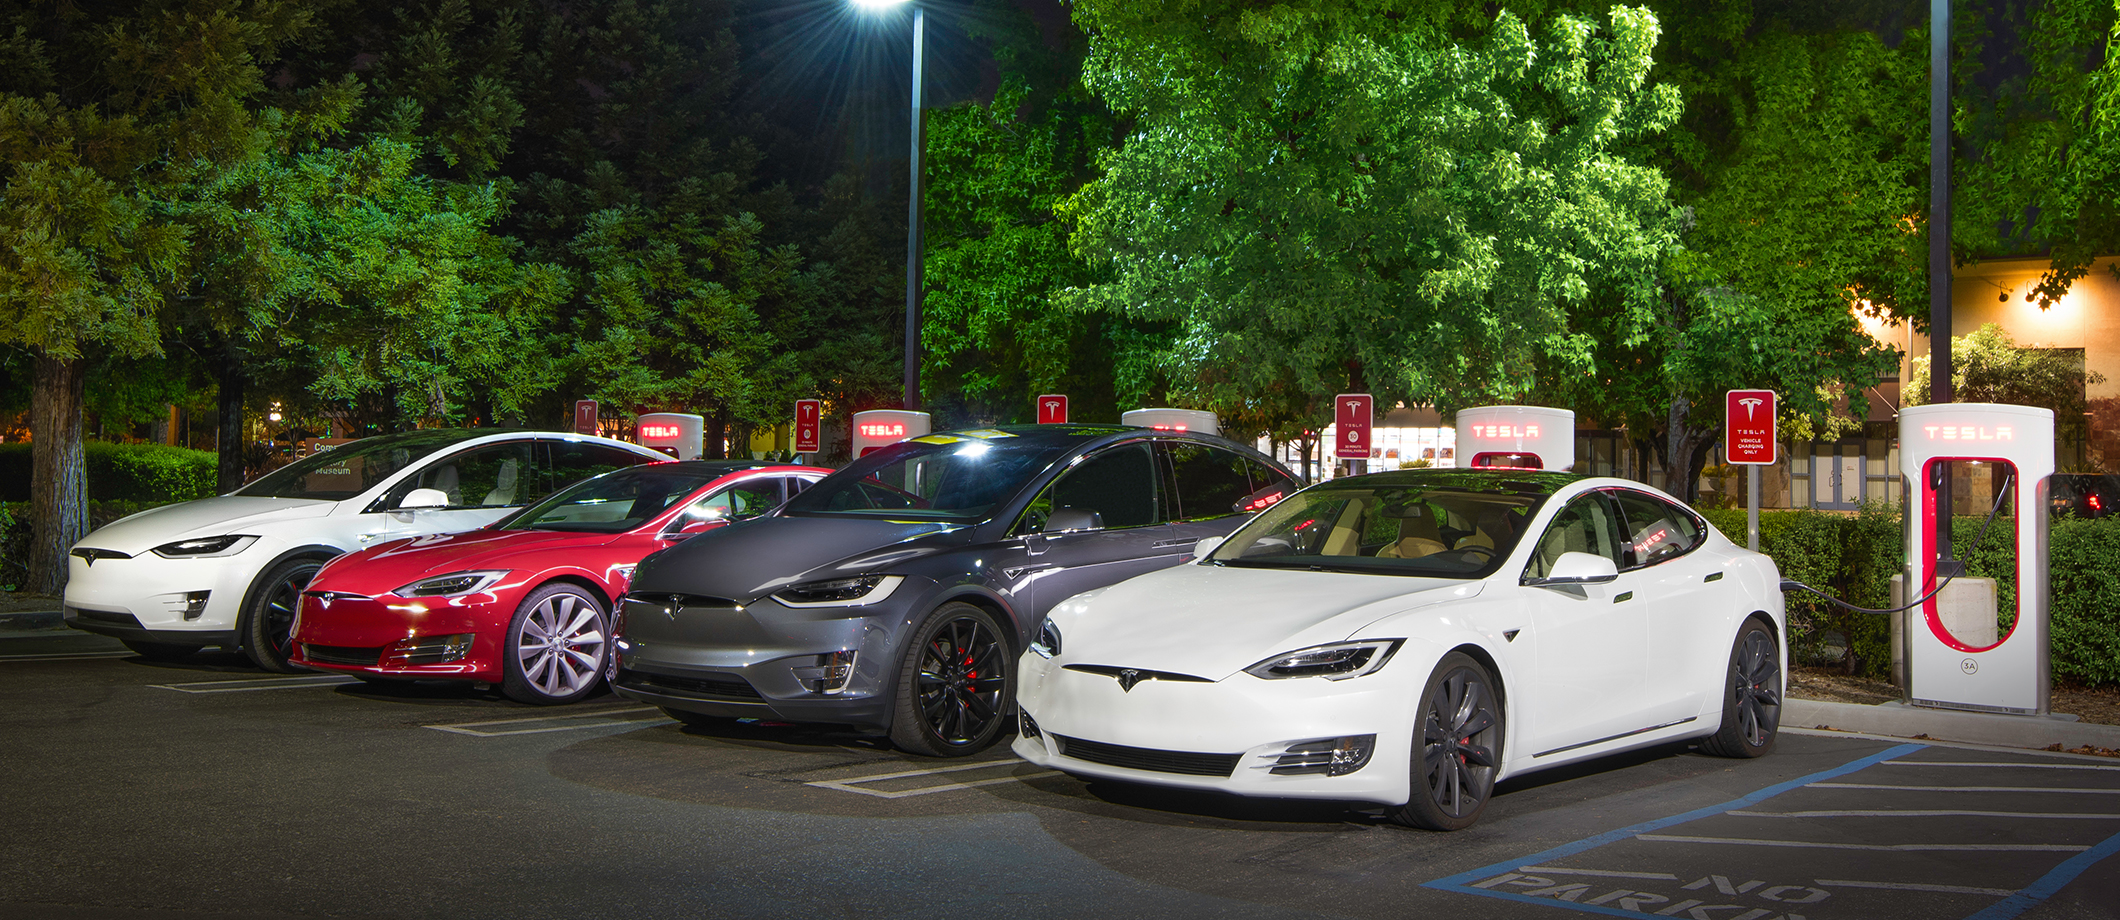 supercharger_group_night